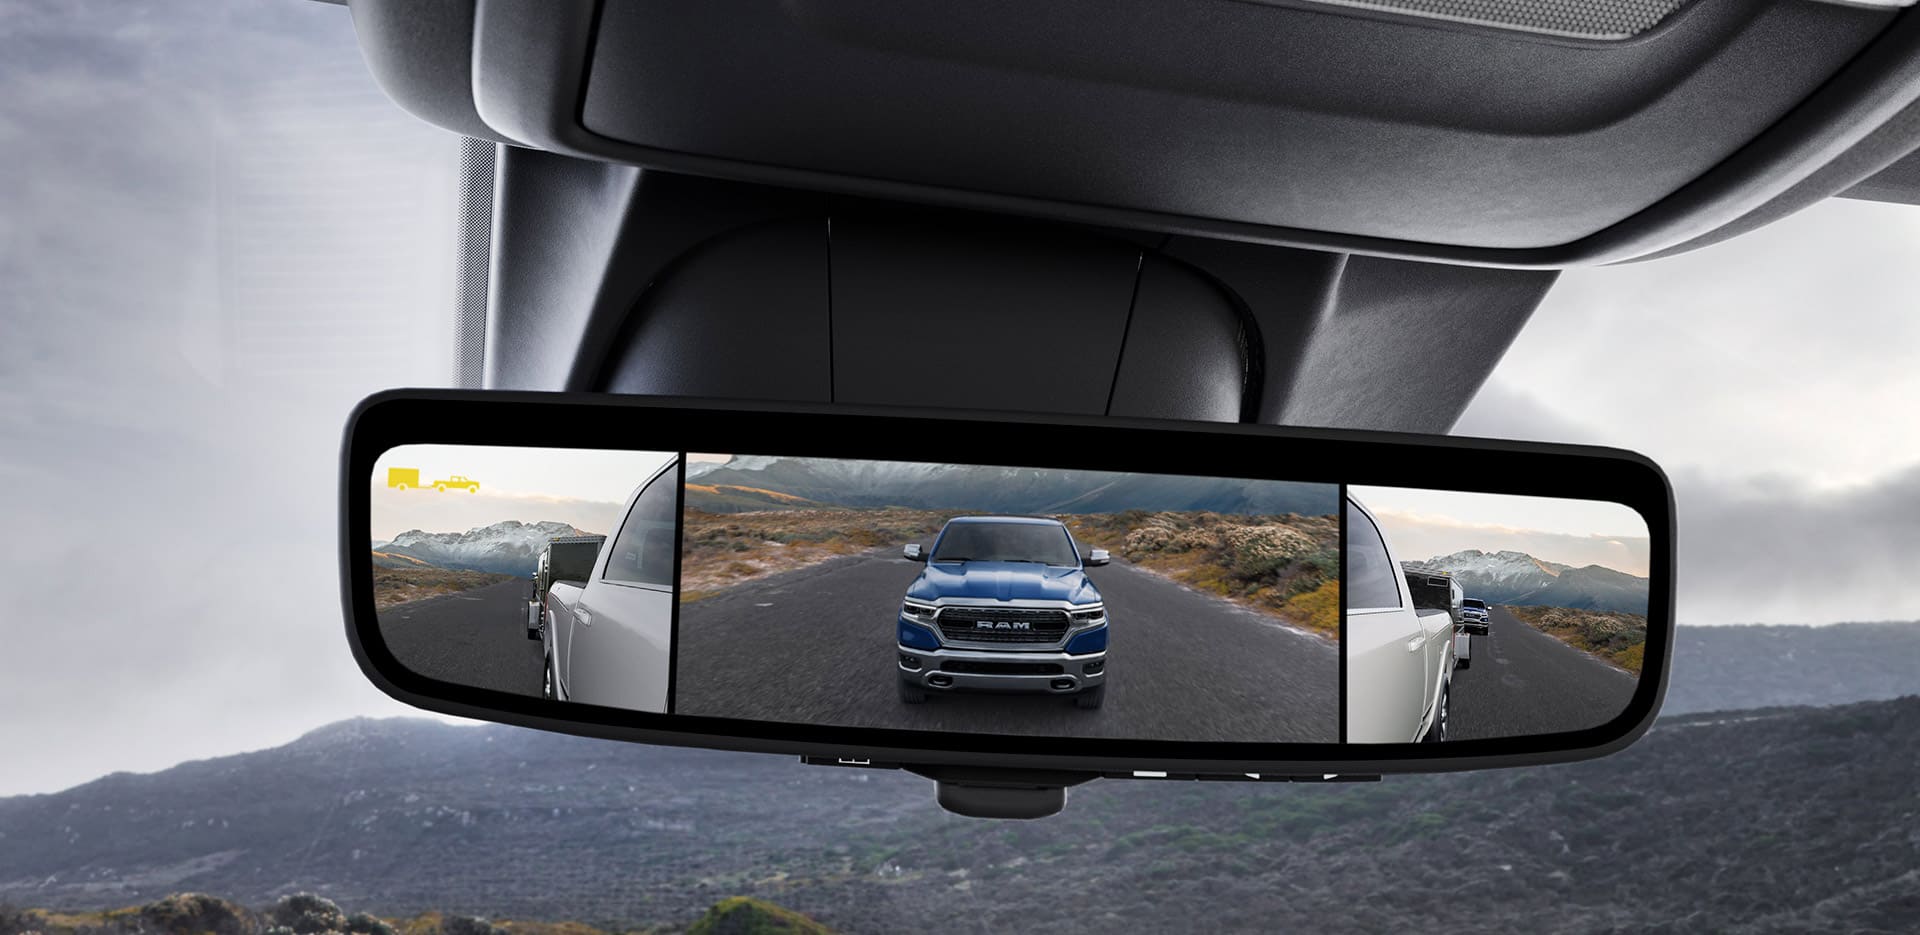  display of the RAM 2500 rear view mirror showing the left, right and middle view of the truck